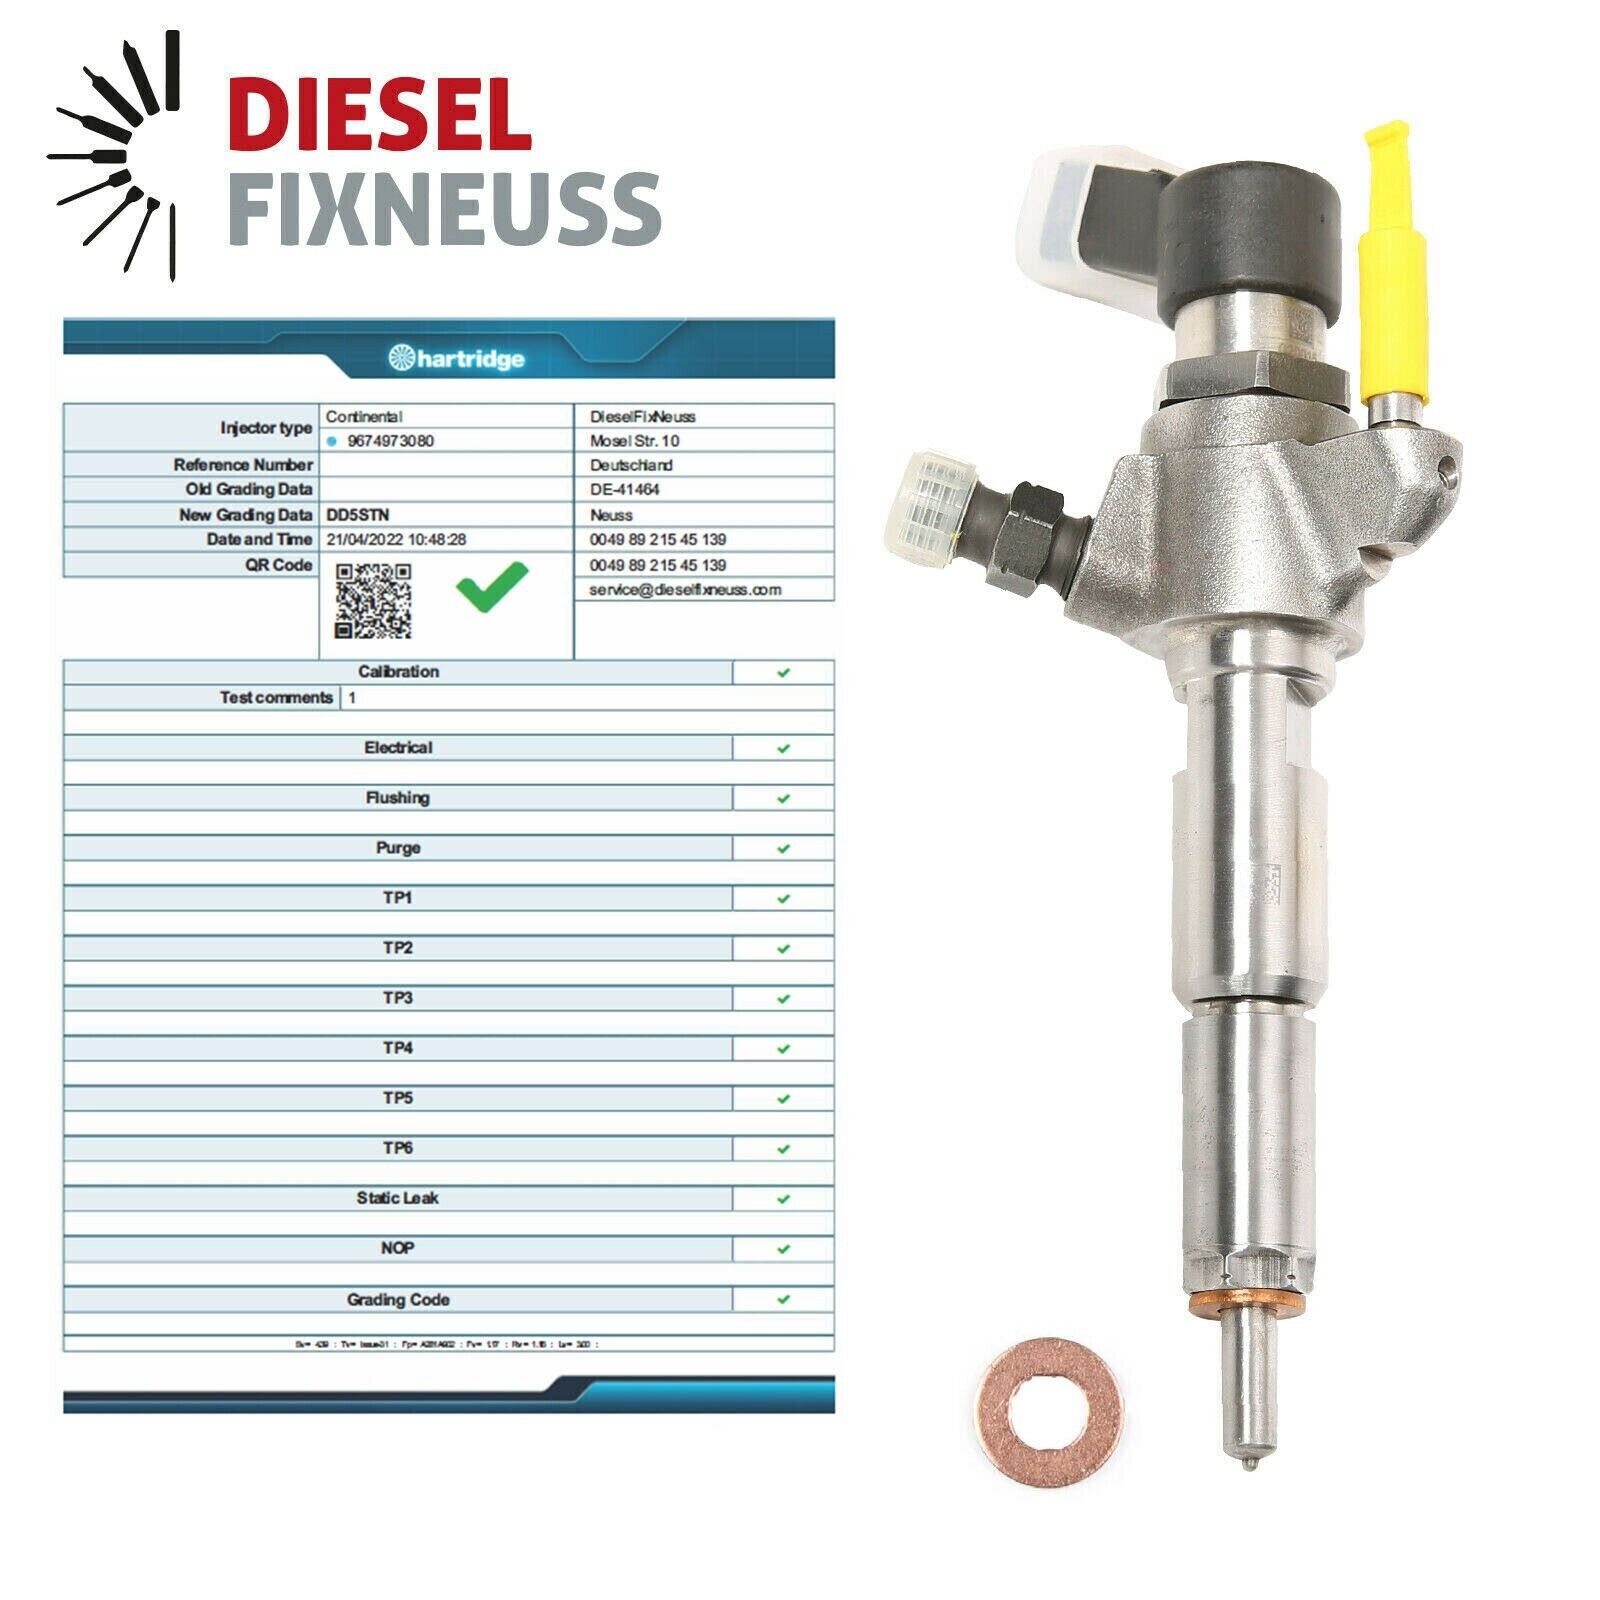 DIESEL INJECTOR for PEUGEOT 508 1.6 HDI 115 hp, 9802448680, 1791017, 9674973080